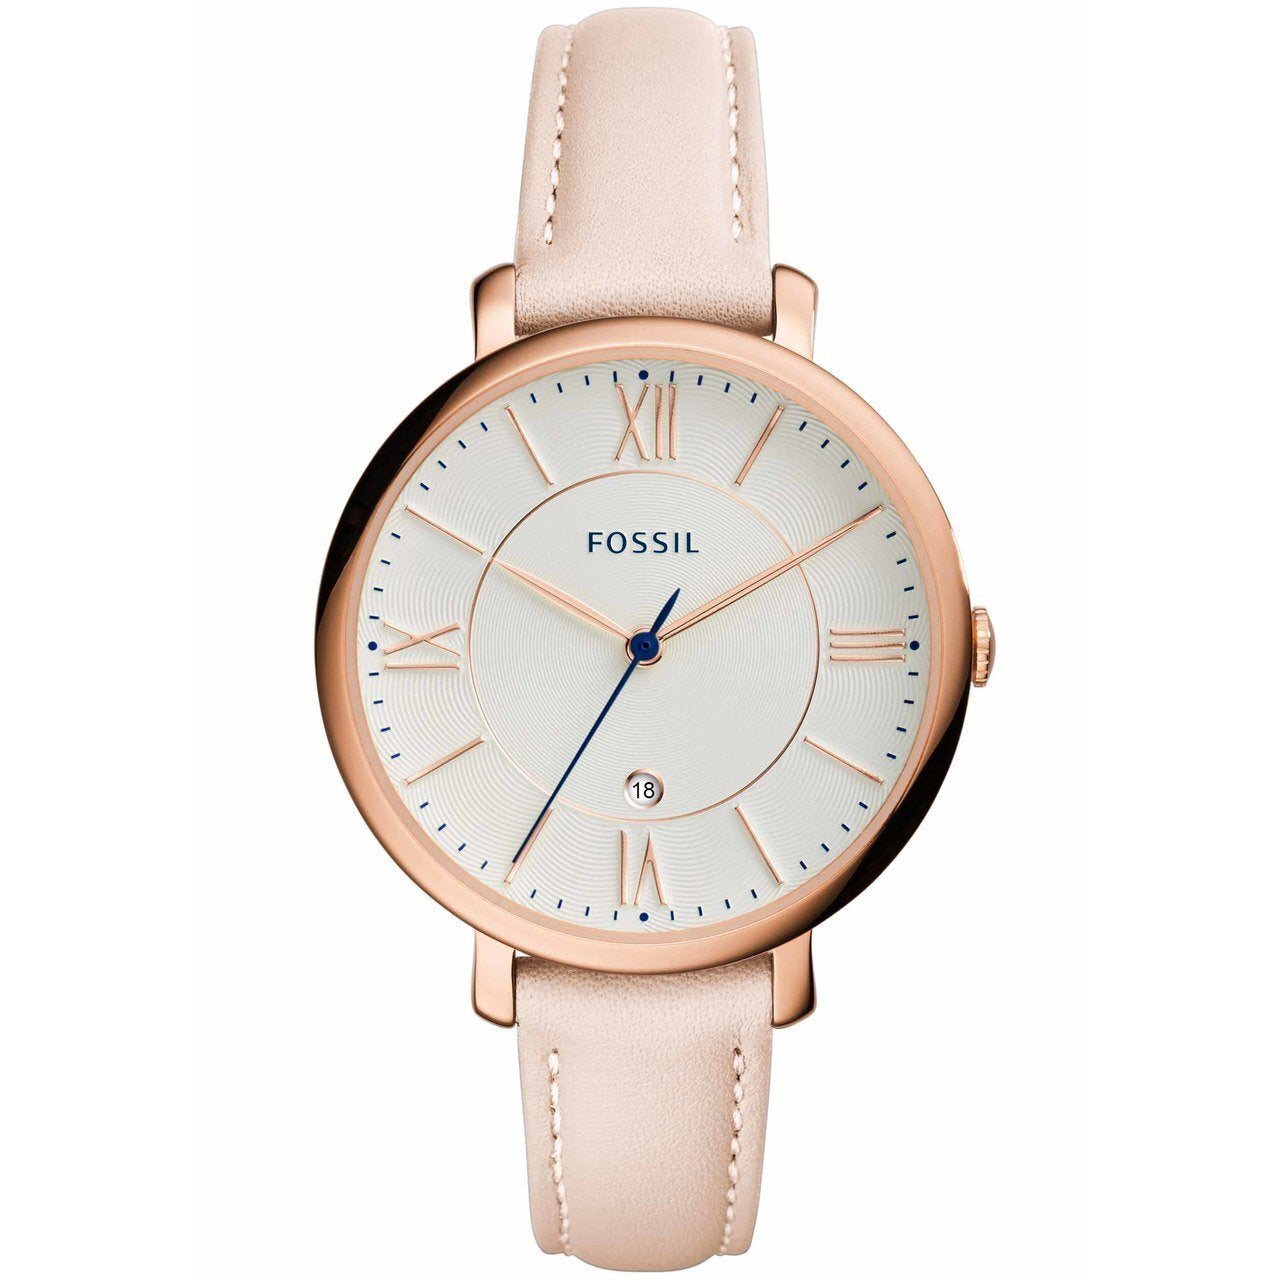 Fossil Jacqueline Rose Gold Blush Leather Watches Com